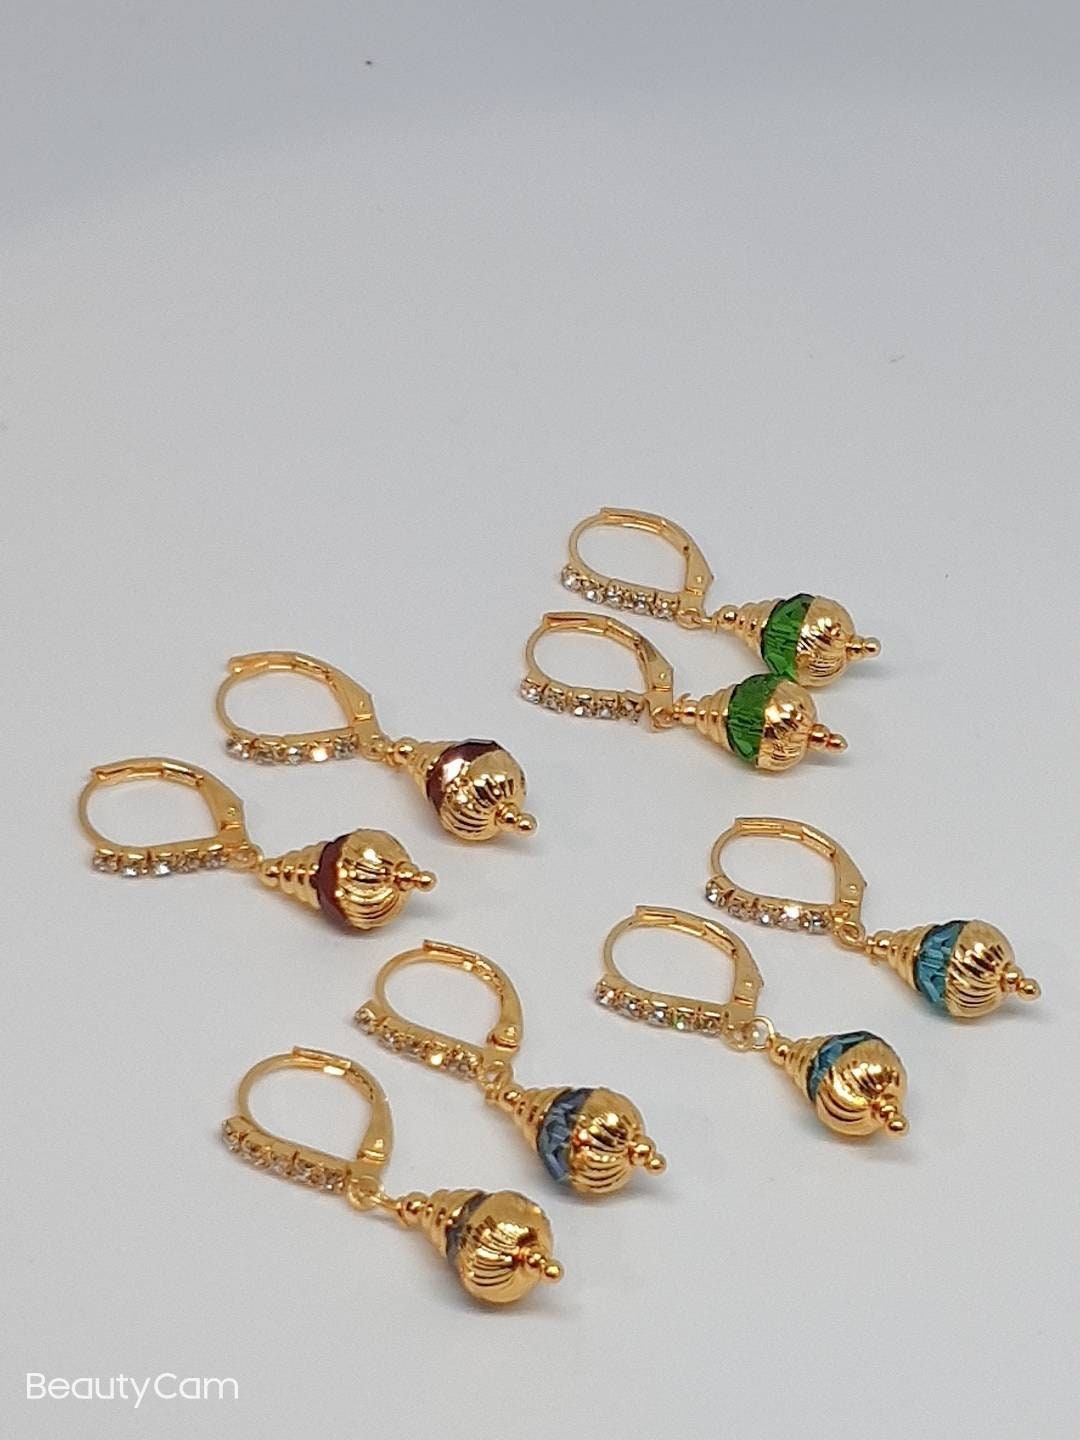 Gift for her - Vintage Lot Four Pair Stud Earrings Gold Toned Chunky Teardrop Round And Oval With Red Yellow Green Stones